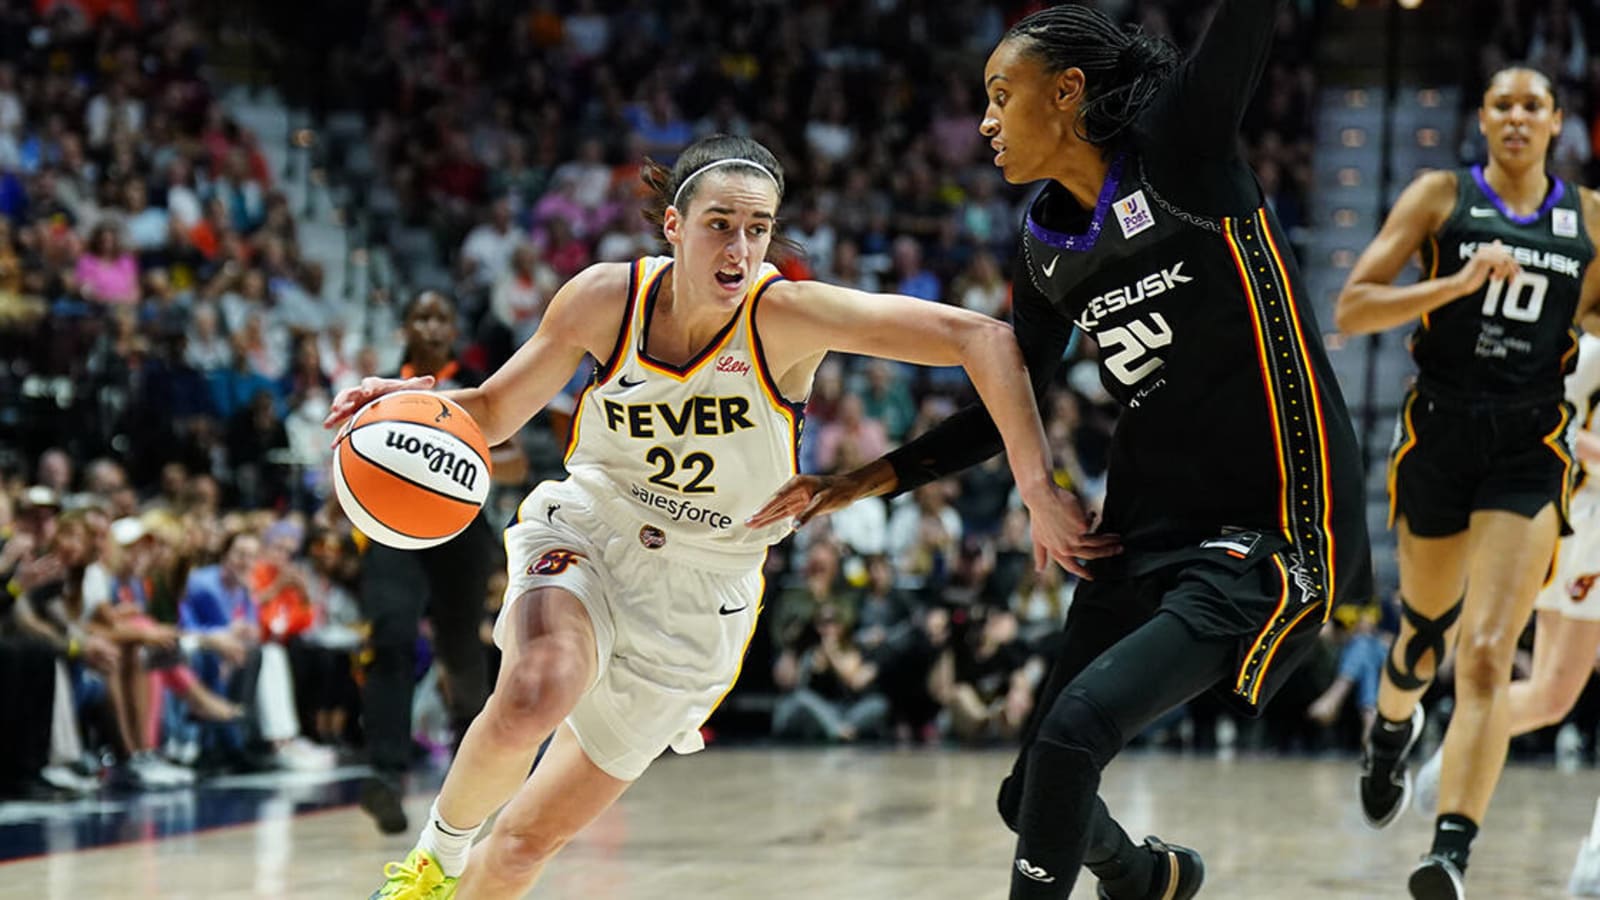 Caitlin Clark’s WNBA debut averages 2.12 million viewers, becomes most-watched game since 2001